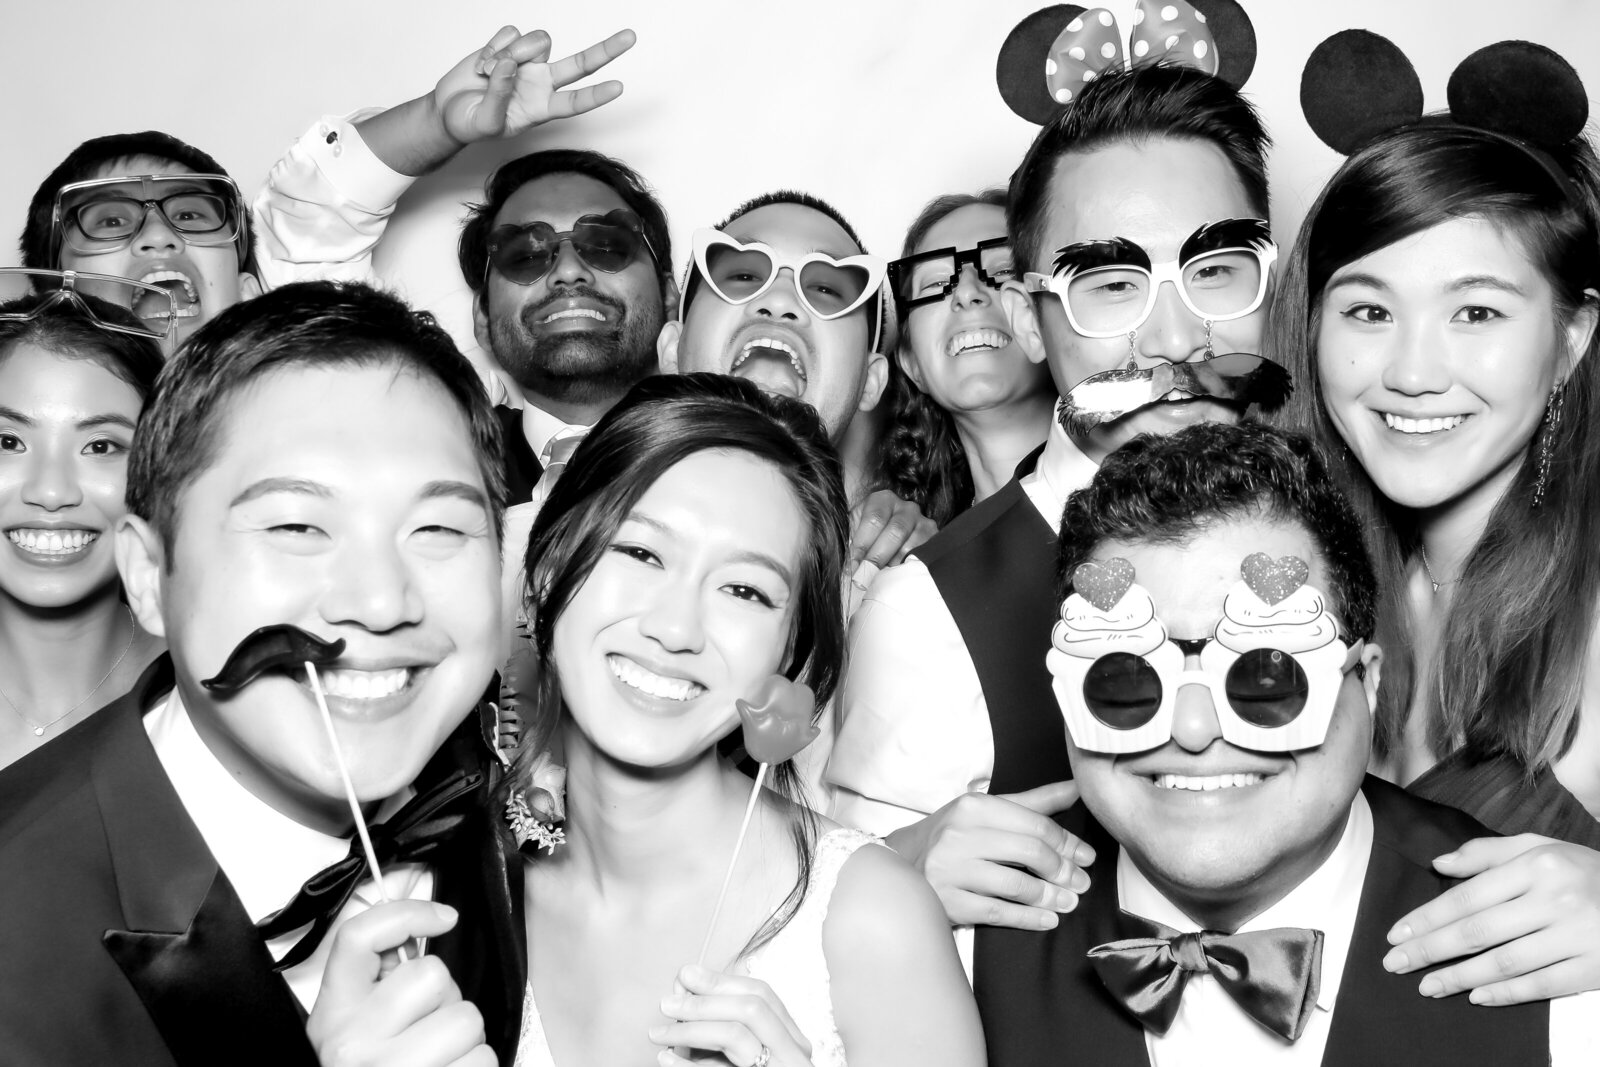 LOS GATOS DJ & PHOTO BOOTH - Ruo Yuan & Wisely's Photo Booth Photos (high-res; bw) (74 of 111)